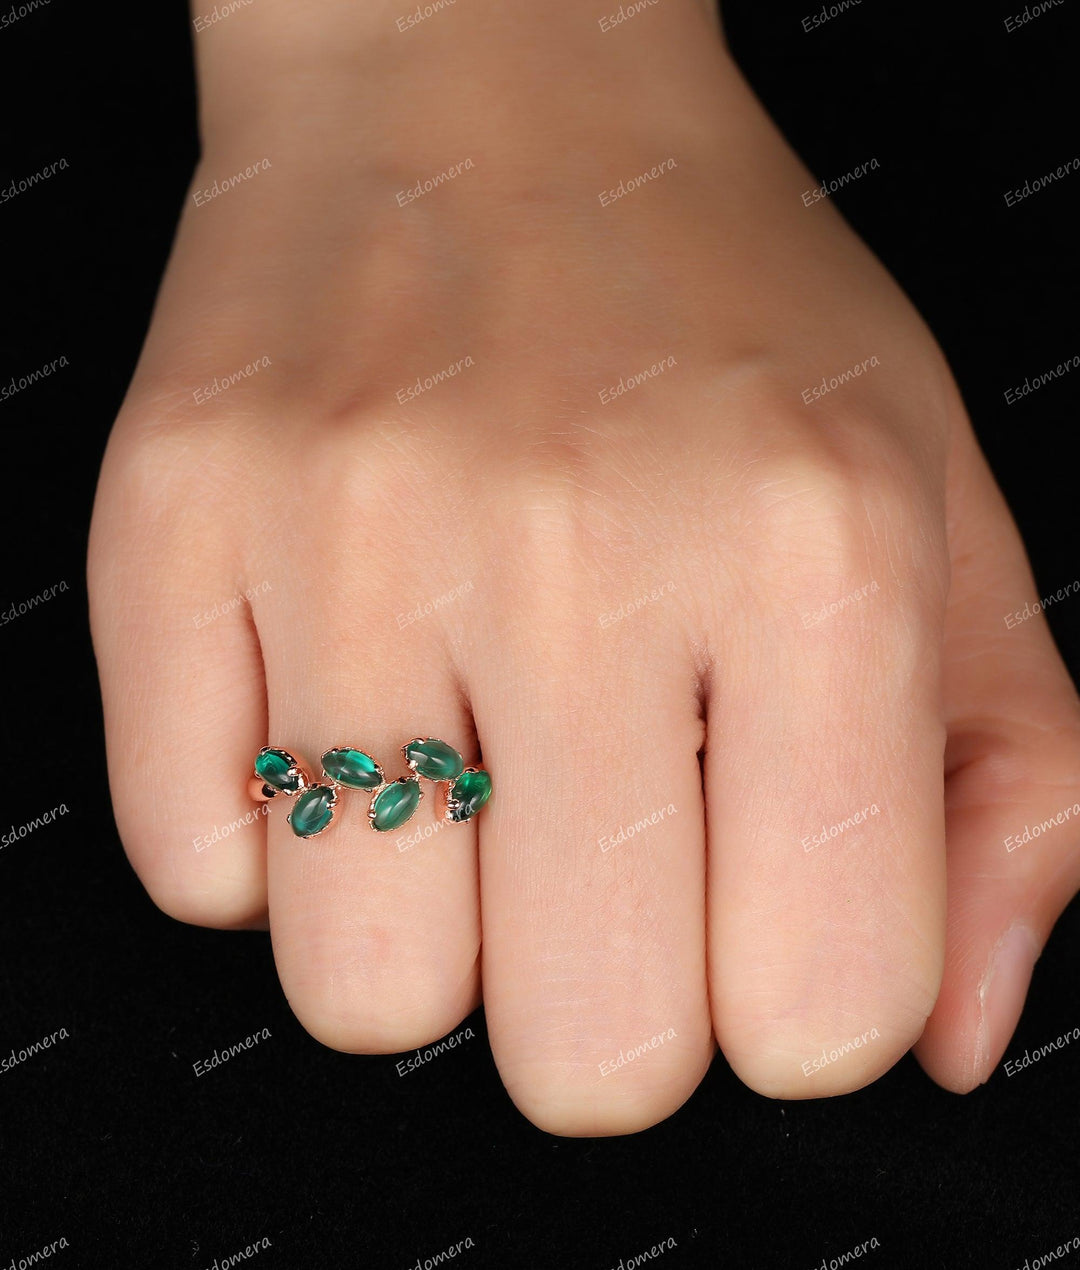 Marquise Cut 1.2CT Emerald Engagement Ring, Leaf Vine Shaped Emerald Ring, 14K Rose Gold May Birthstone Ring - Esdomera